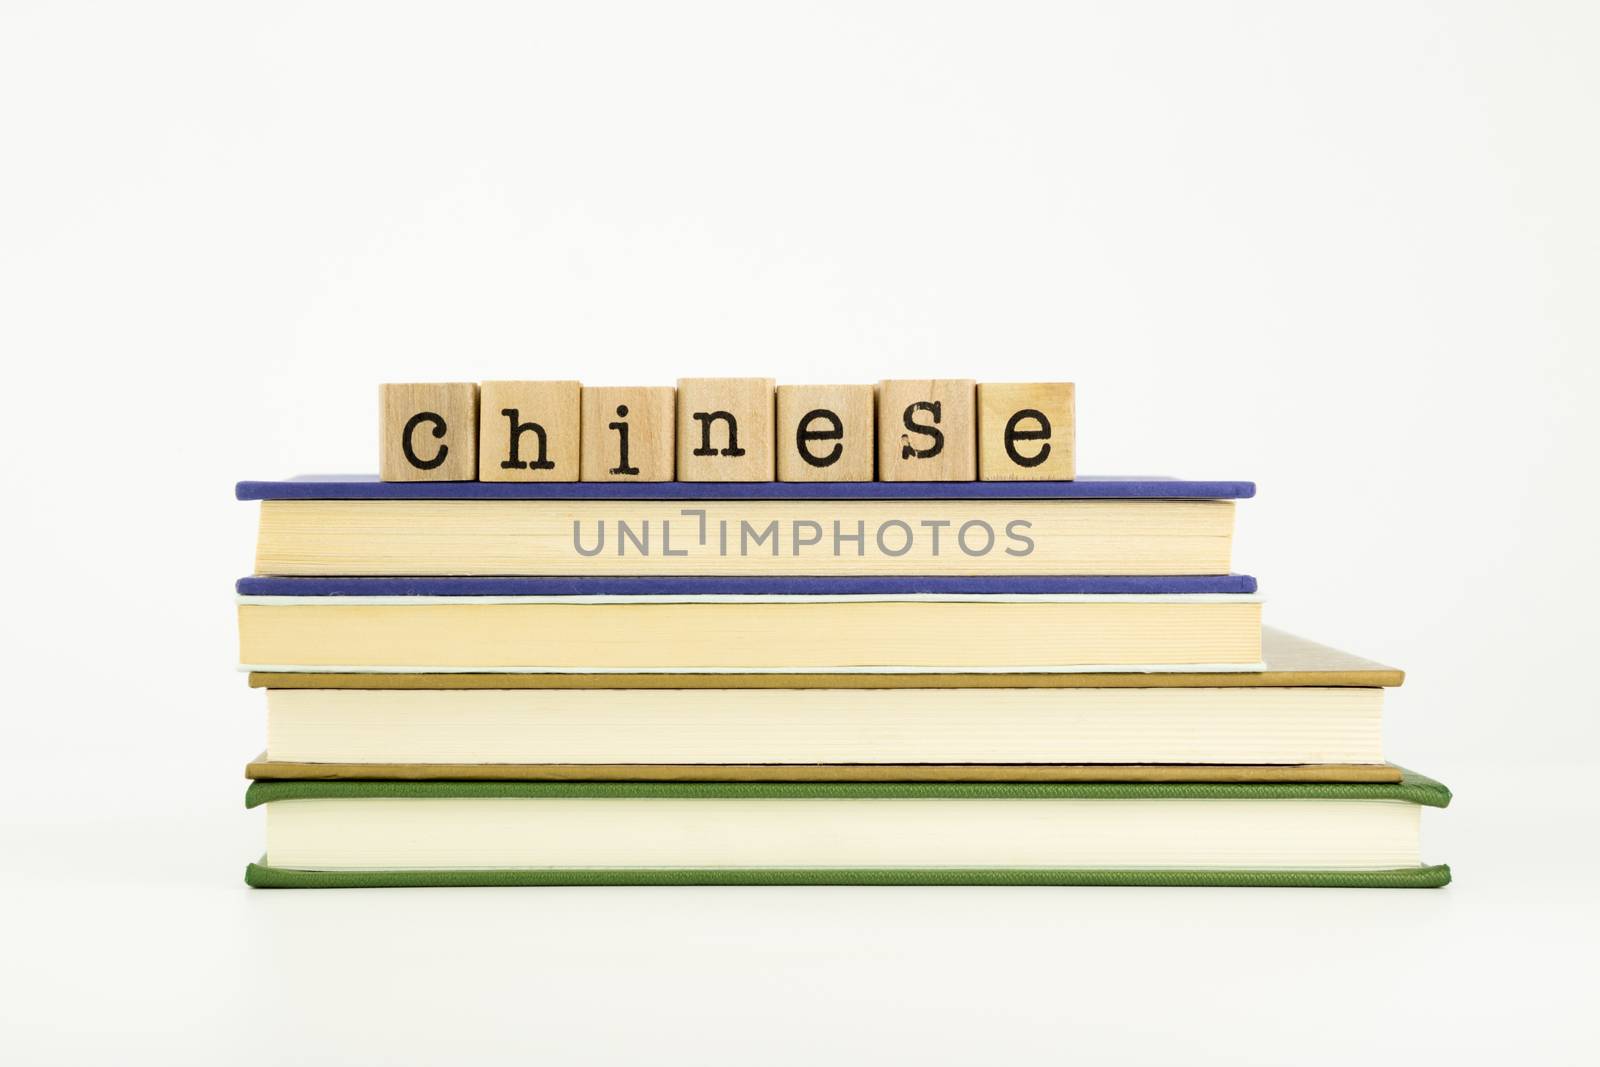 chinese word on wood stamps stack on books, language and academic concept